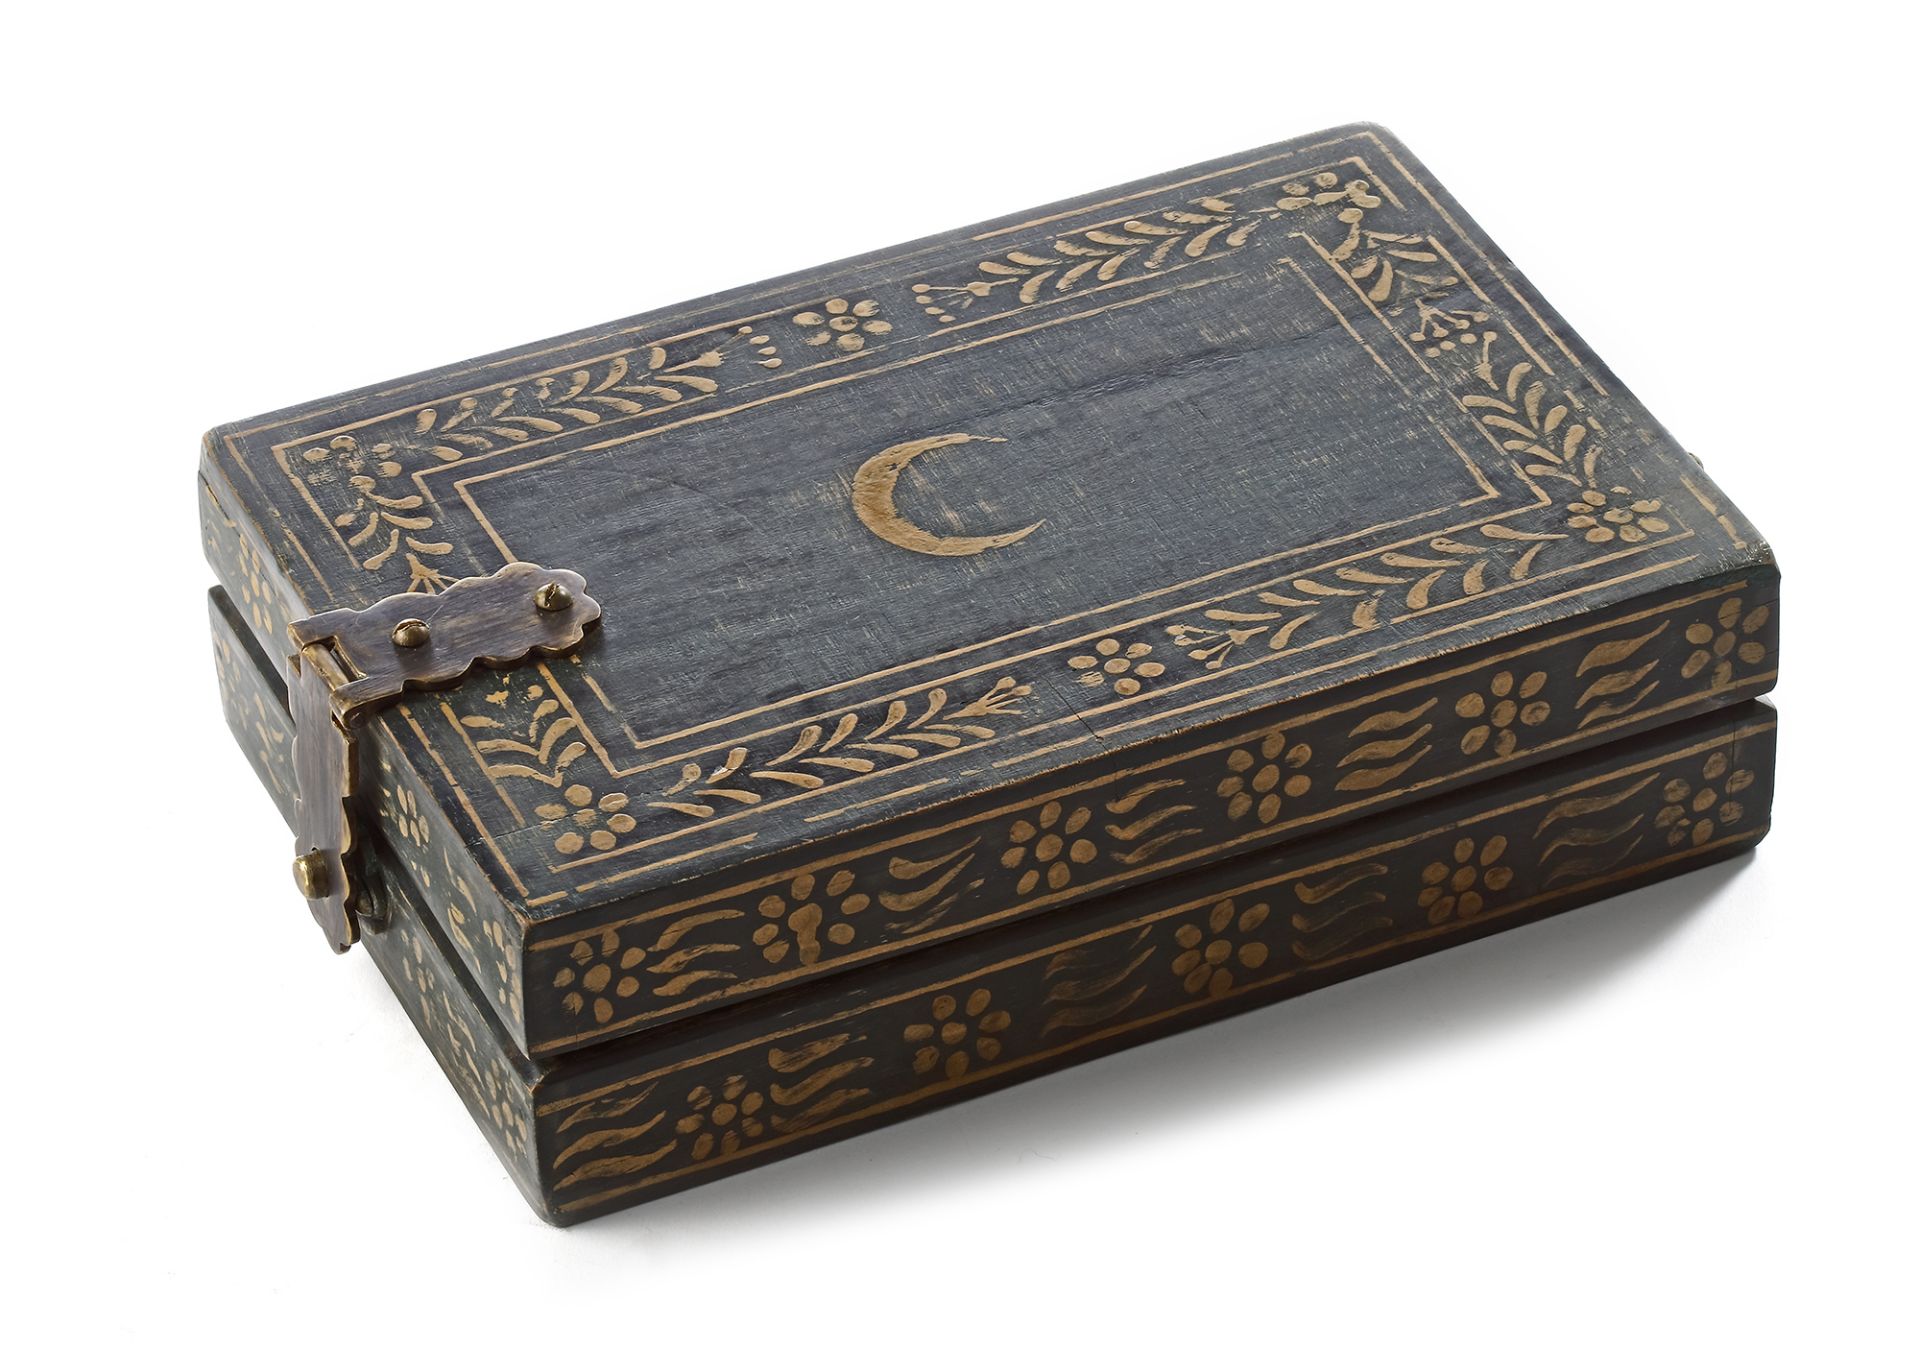 AN OTTOMAN COMPASS AND QIBLA INDICATOR, 19TH CENTURY - Image 10 of 10